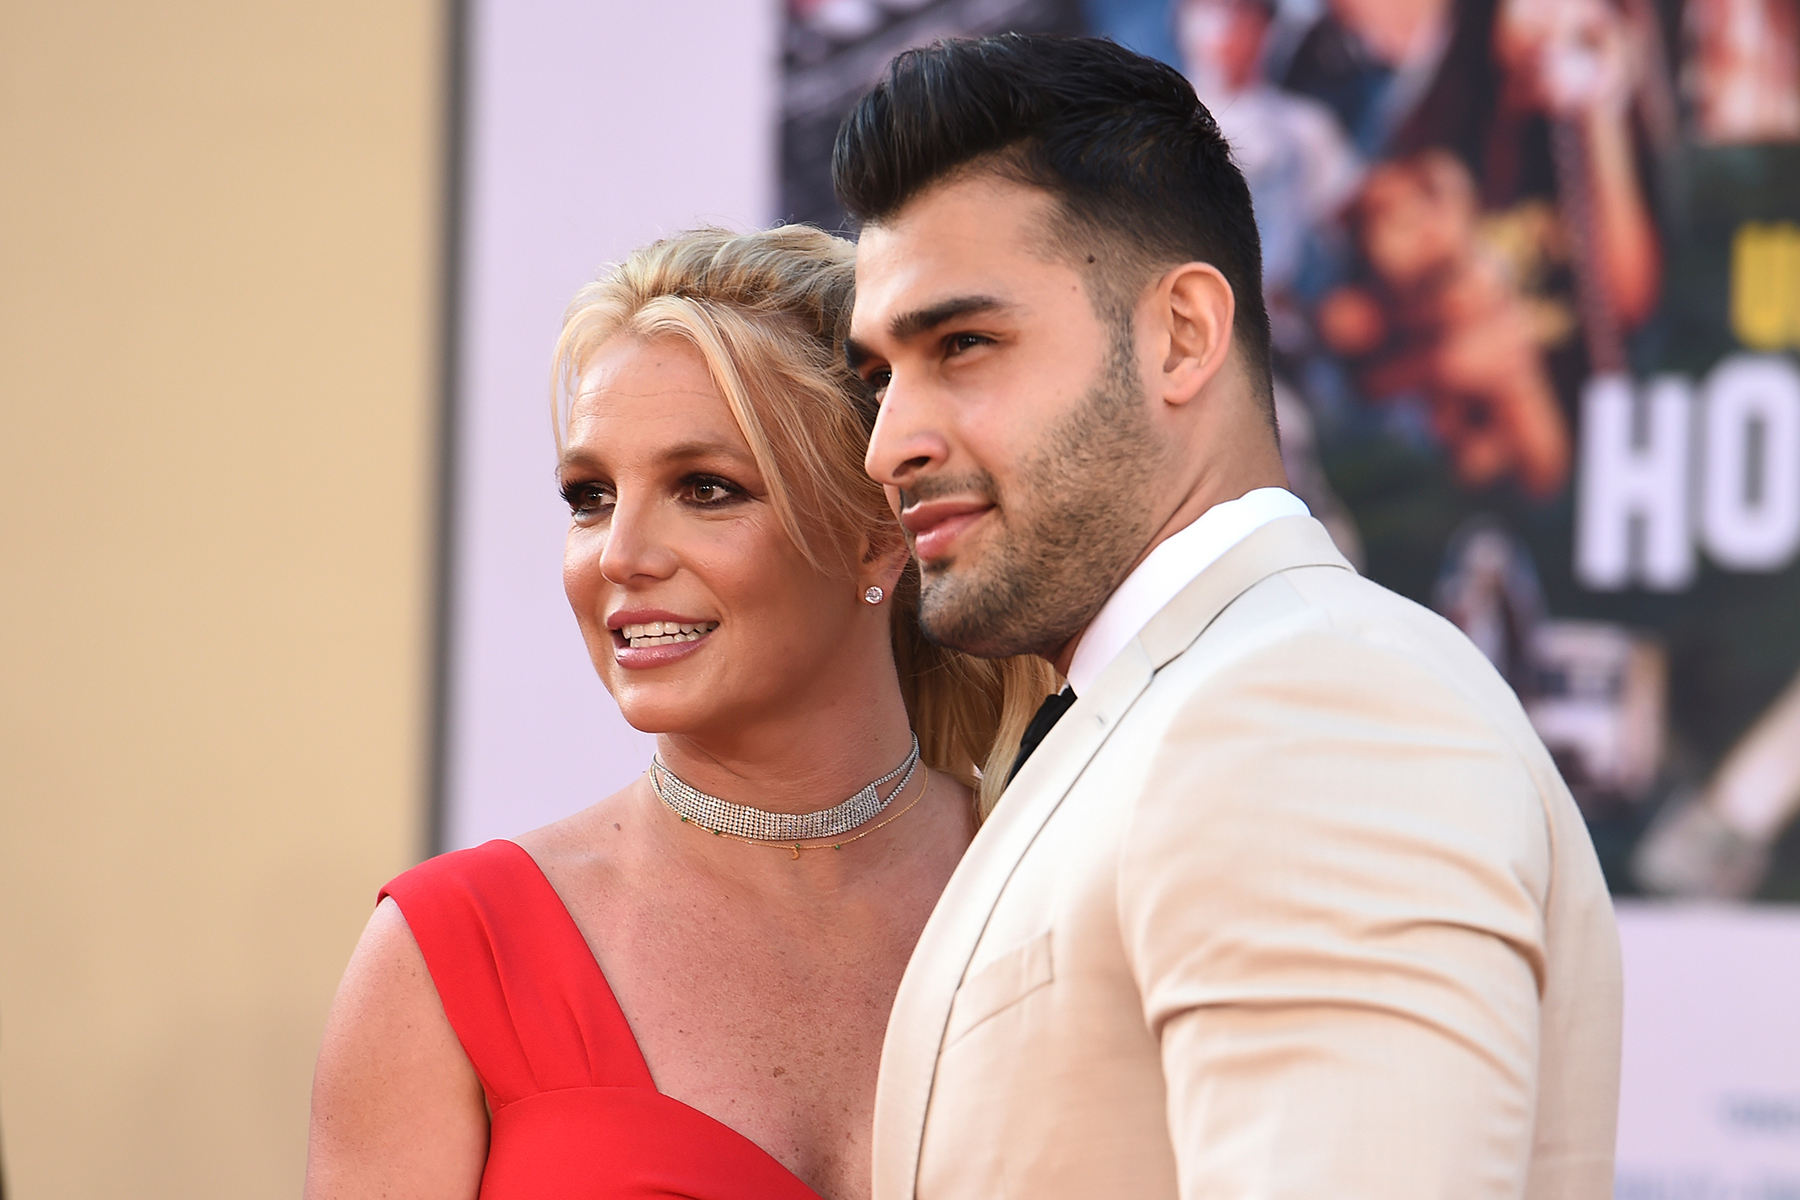 Can Britney Spears’ Conservators Legally Bar Her From Having a Baby?